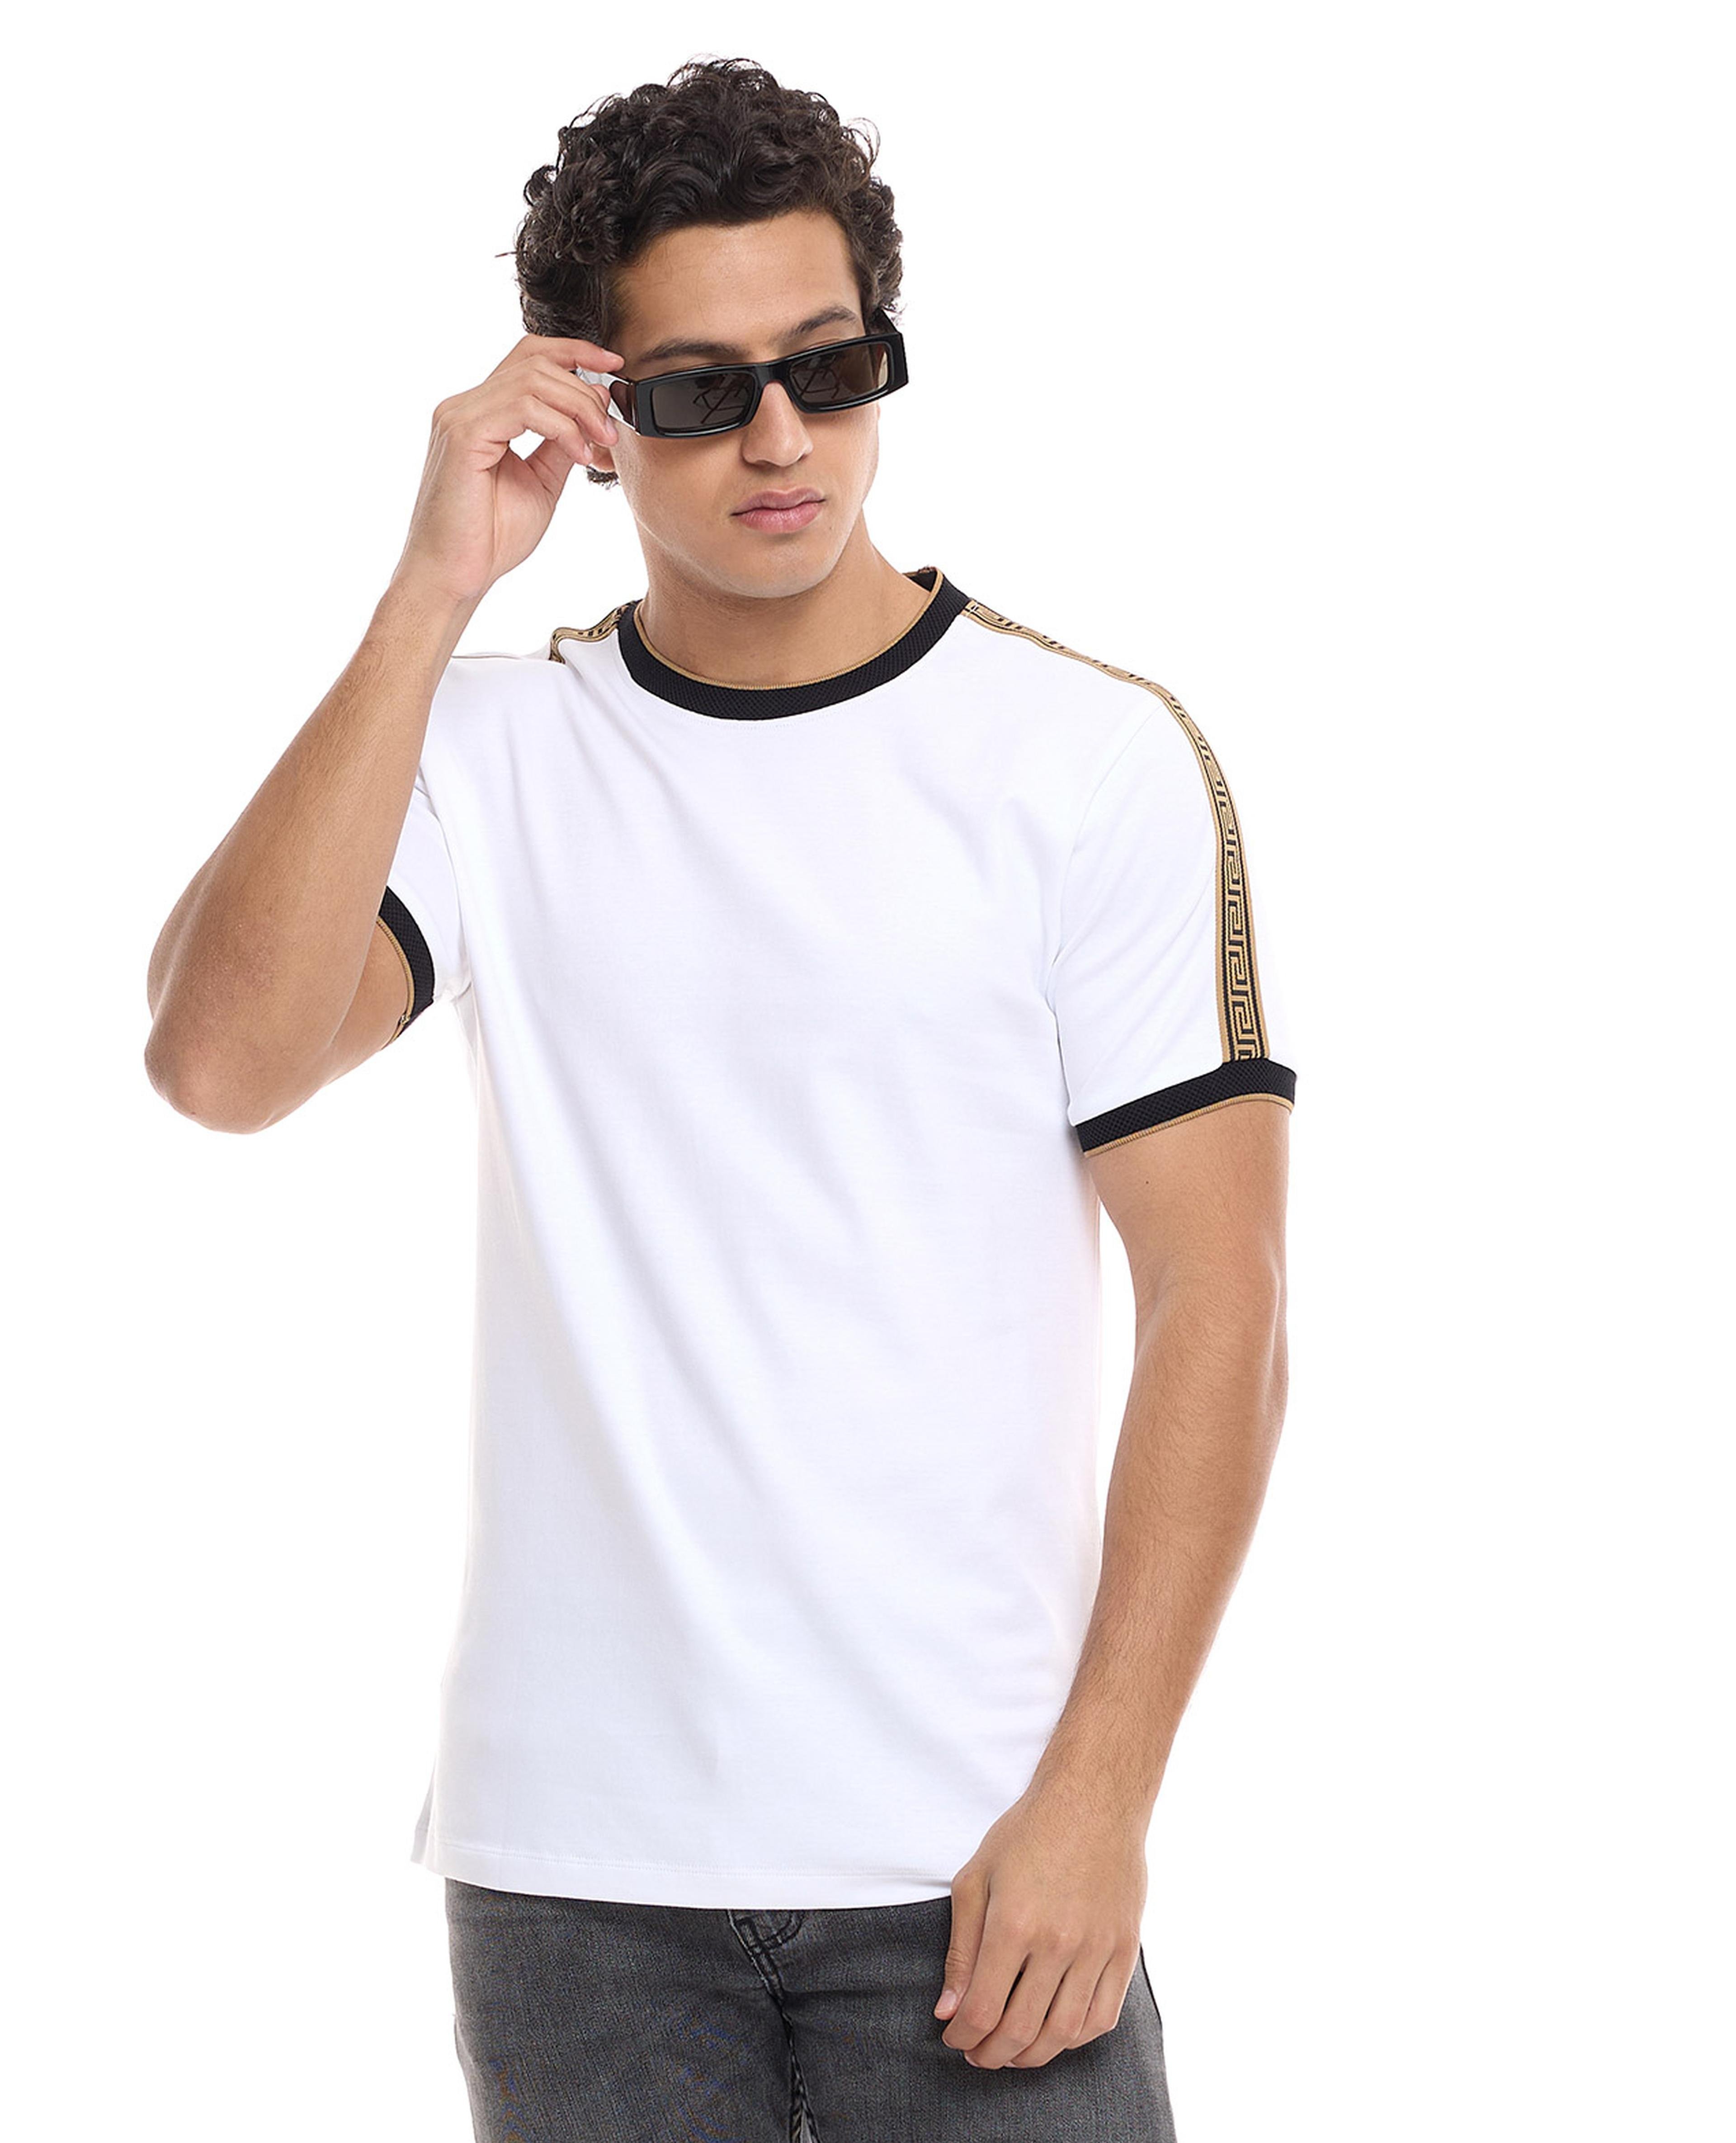 Contrast Tape T-Shirt with Crew Neck and Short Sleeves